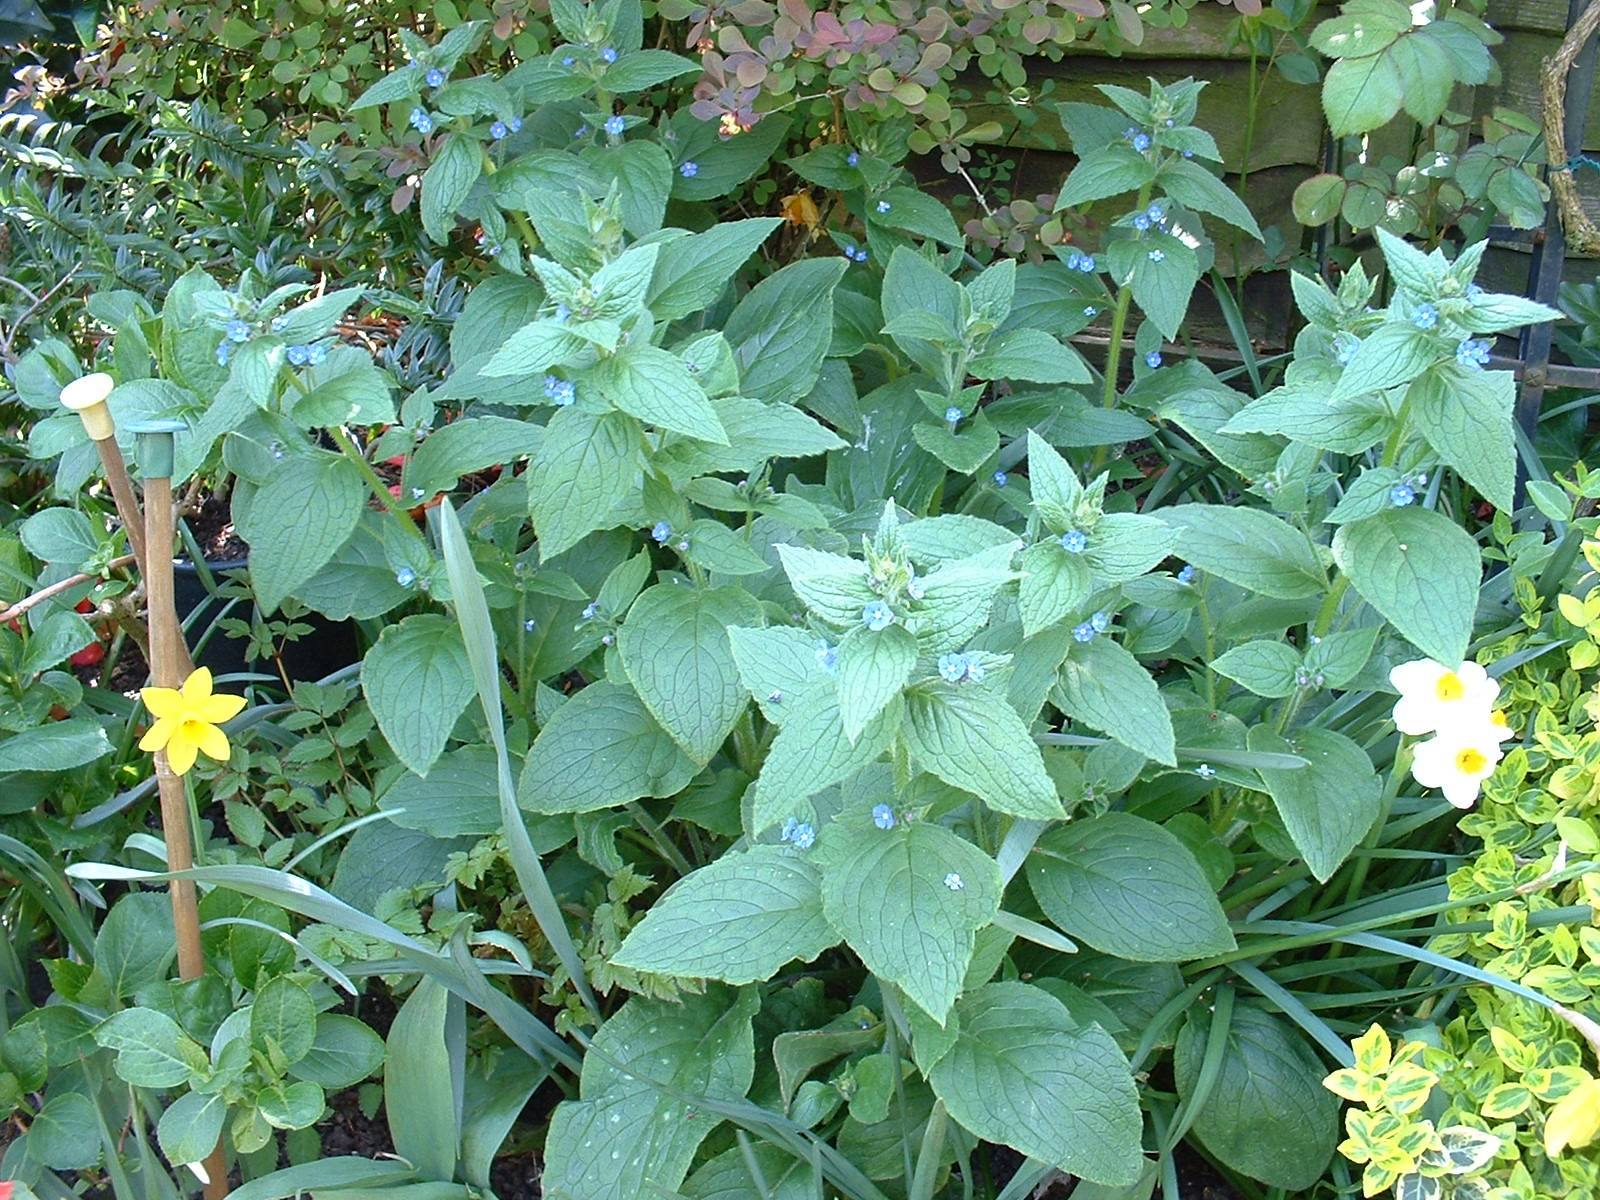 identification - Can anyone assist in identifying this large leaved ...